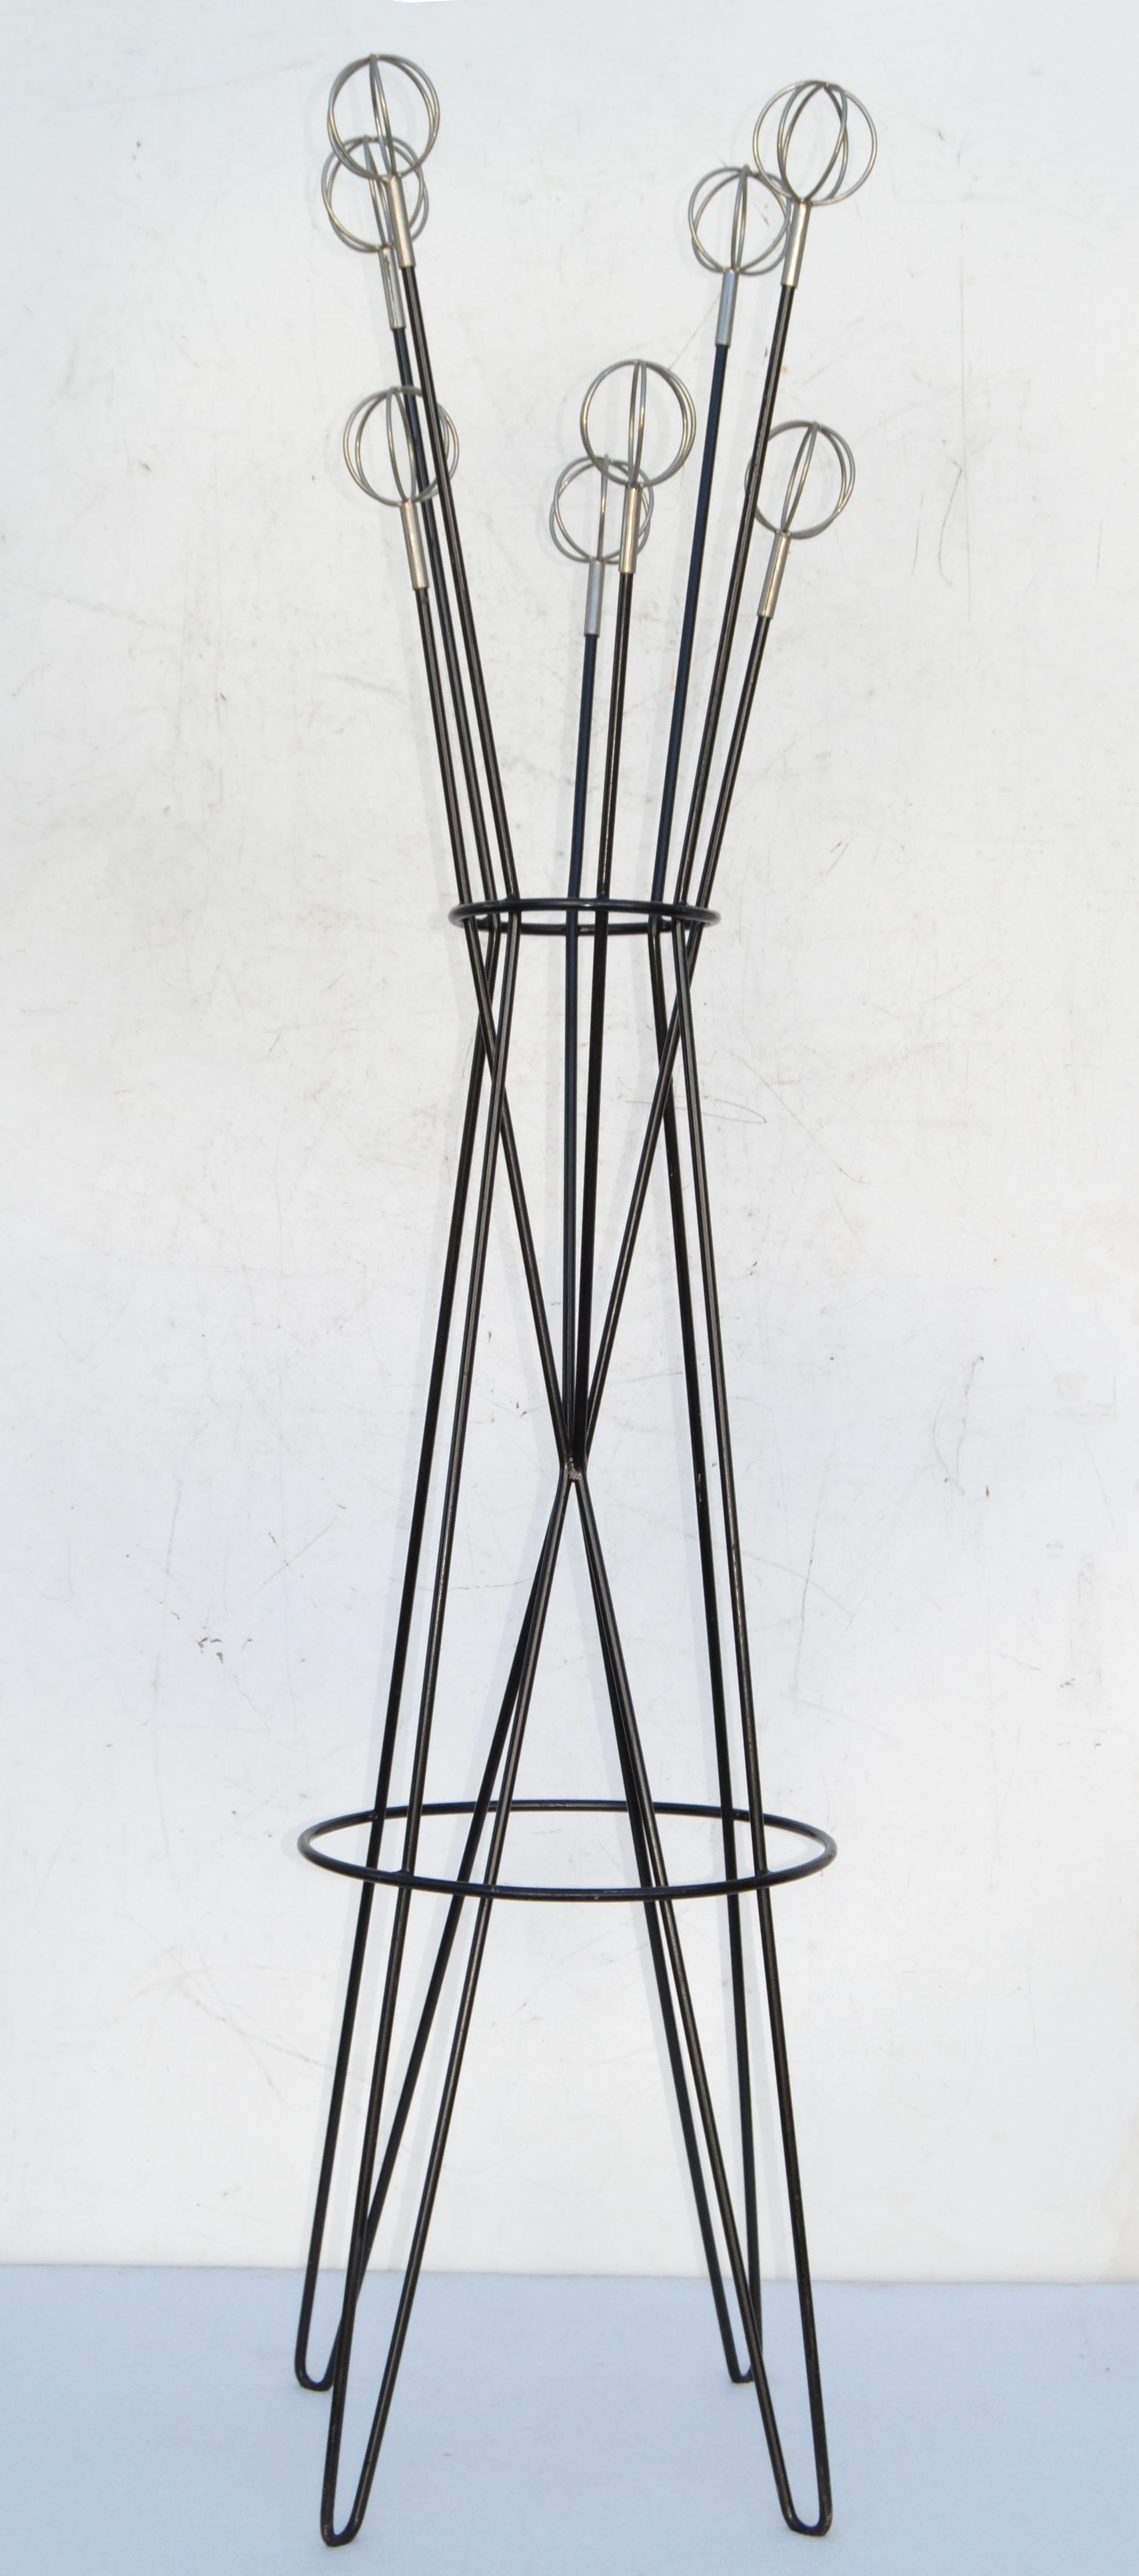 Hand-Crafted Roger Feraud French Mid-Century Modern Iron & Nickel Coat Hat Rack Space Age For Sale